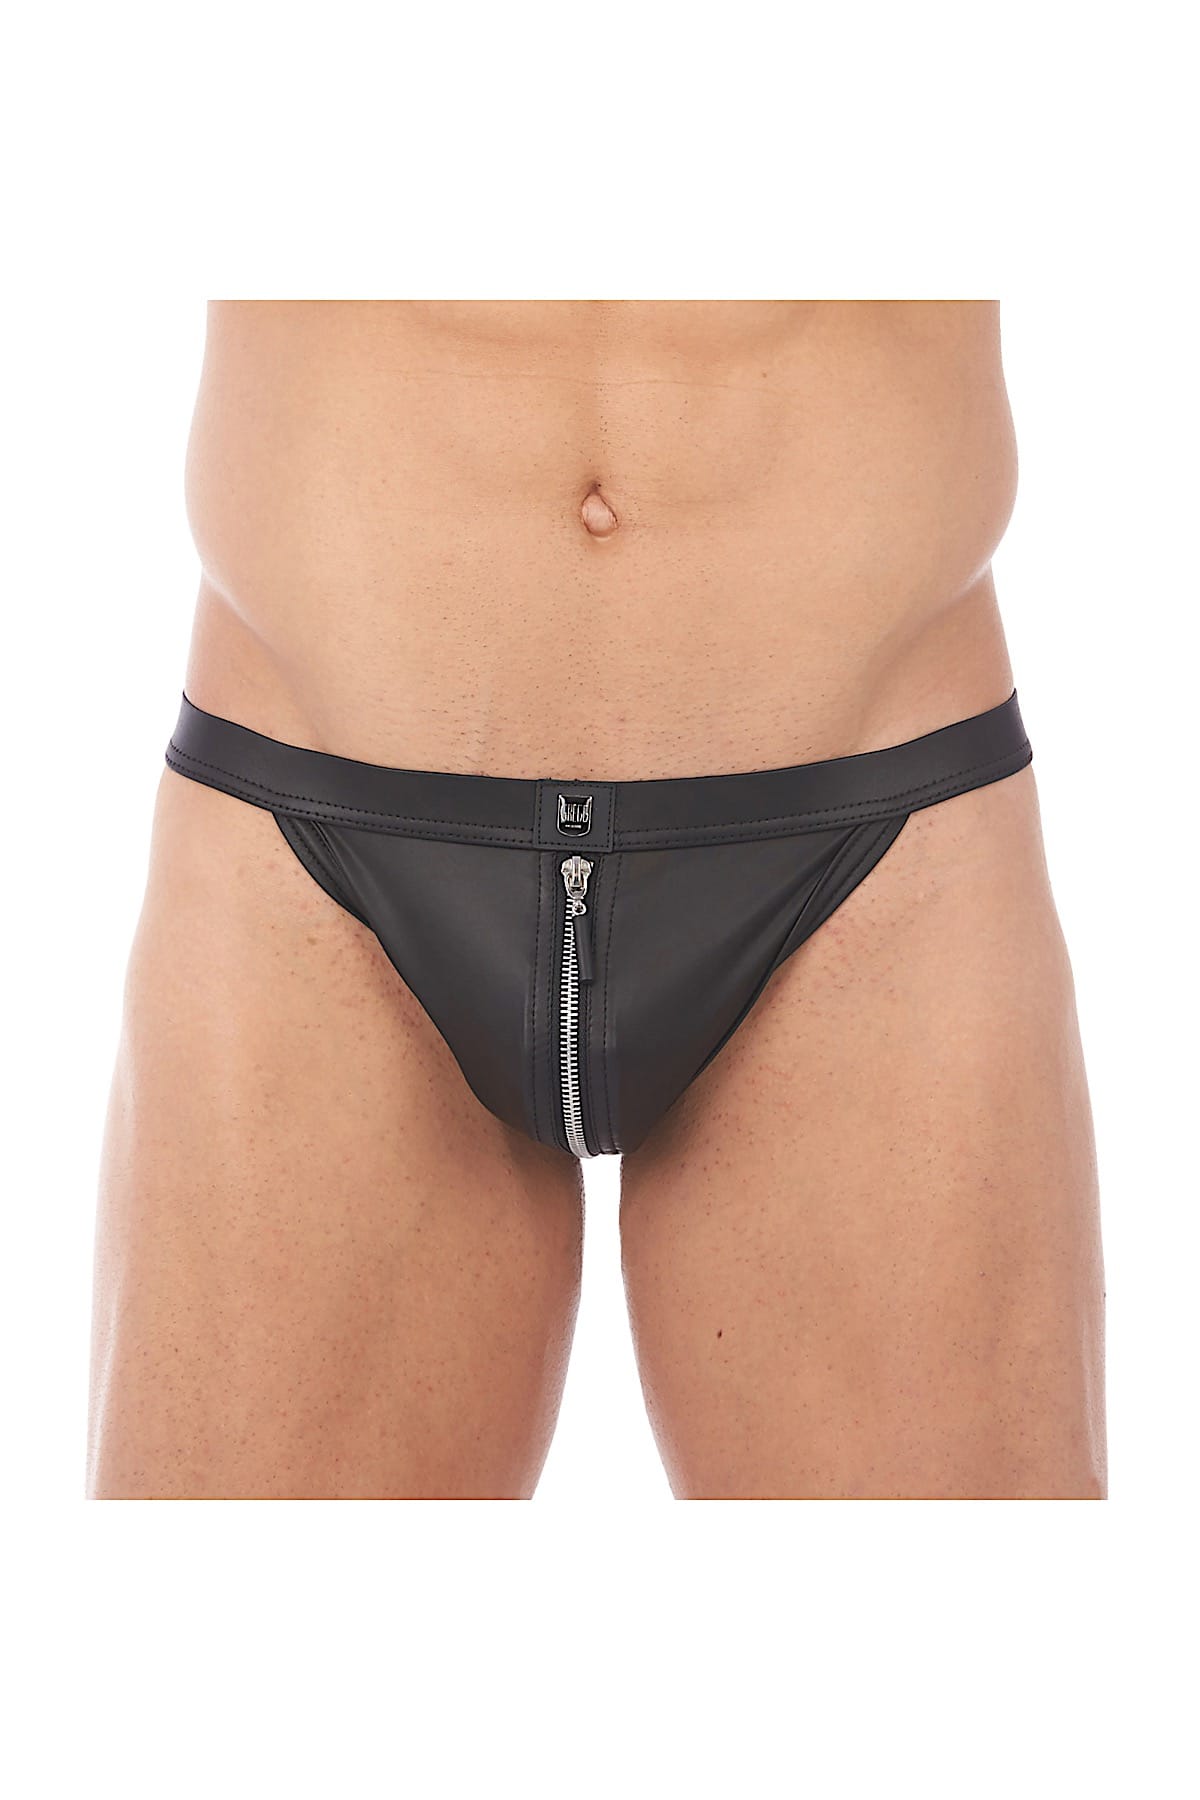 Gregg Homme Red/Black Reckless Zipper Leather-Look Thong